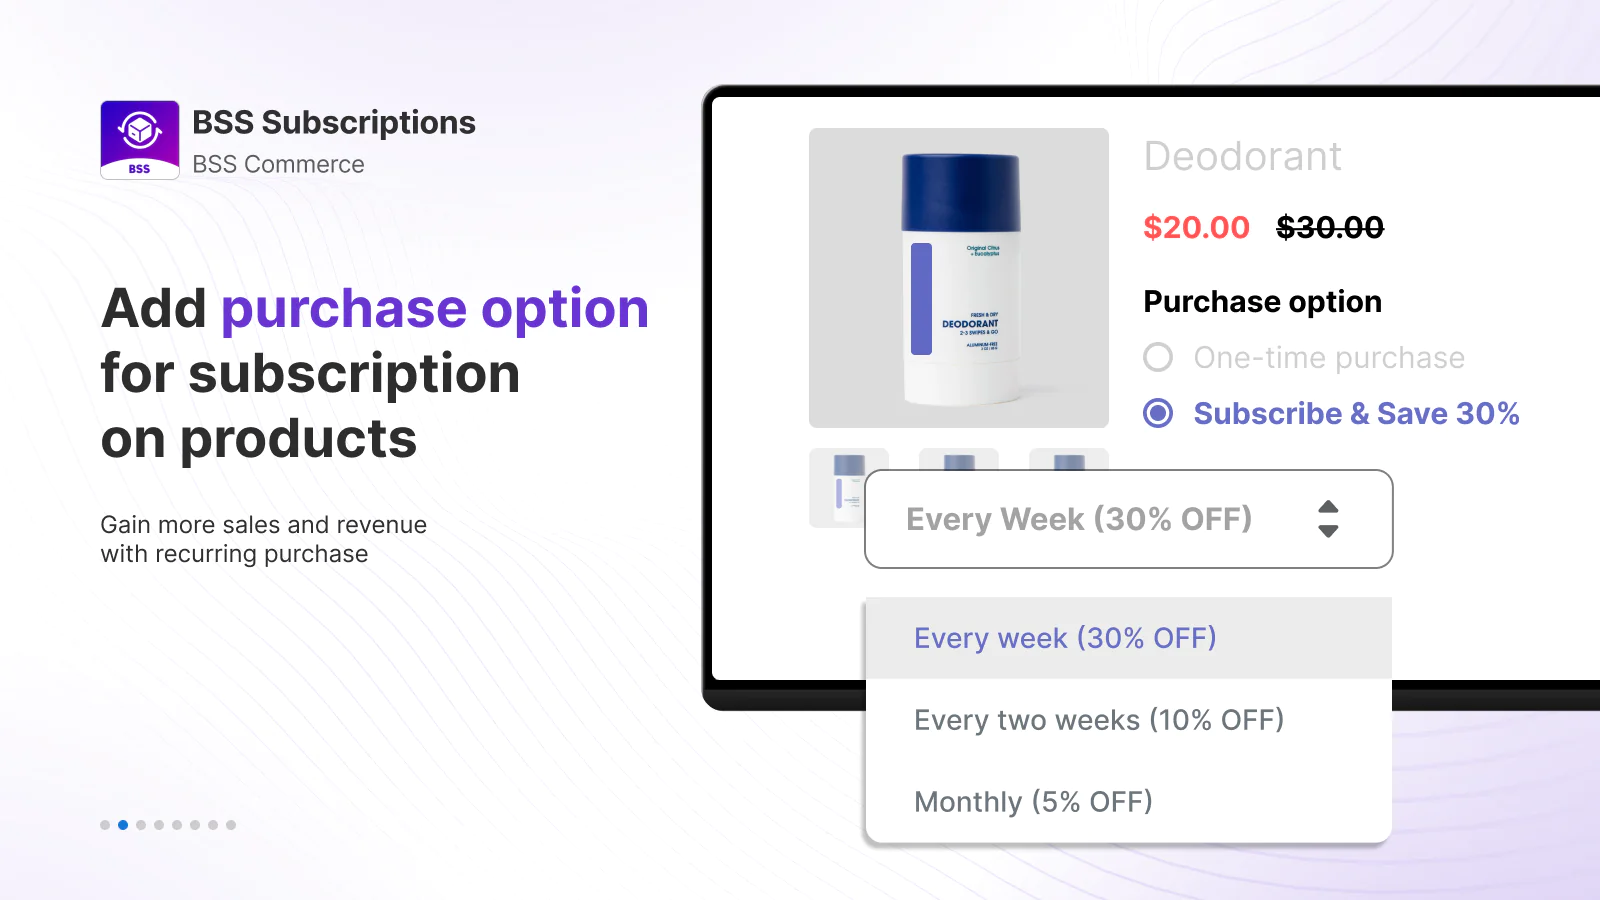 bss-b2b-subscriptions-purchase-option